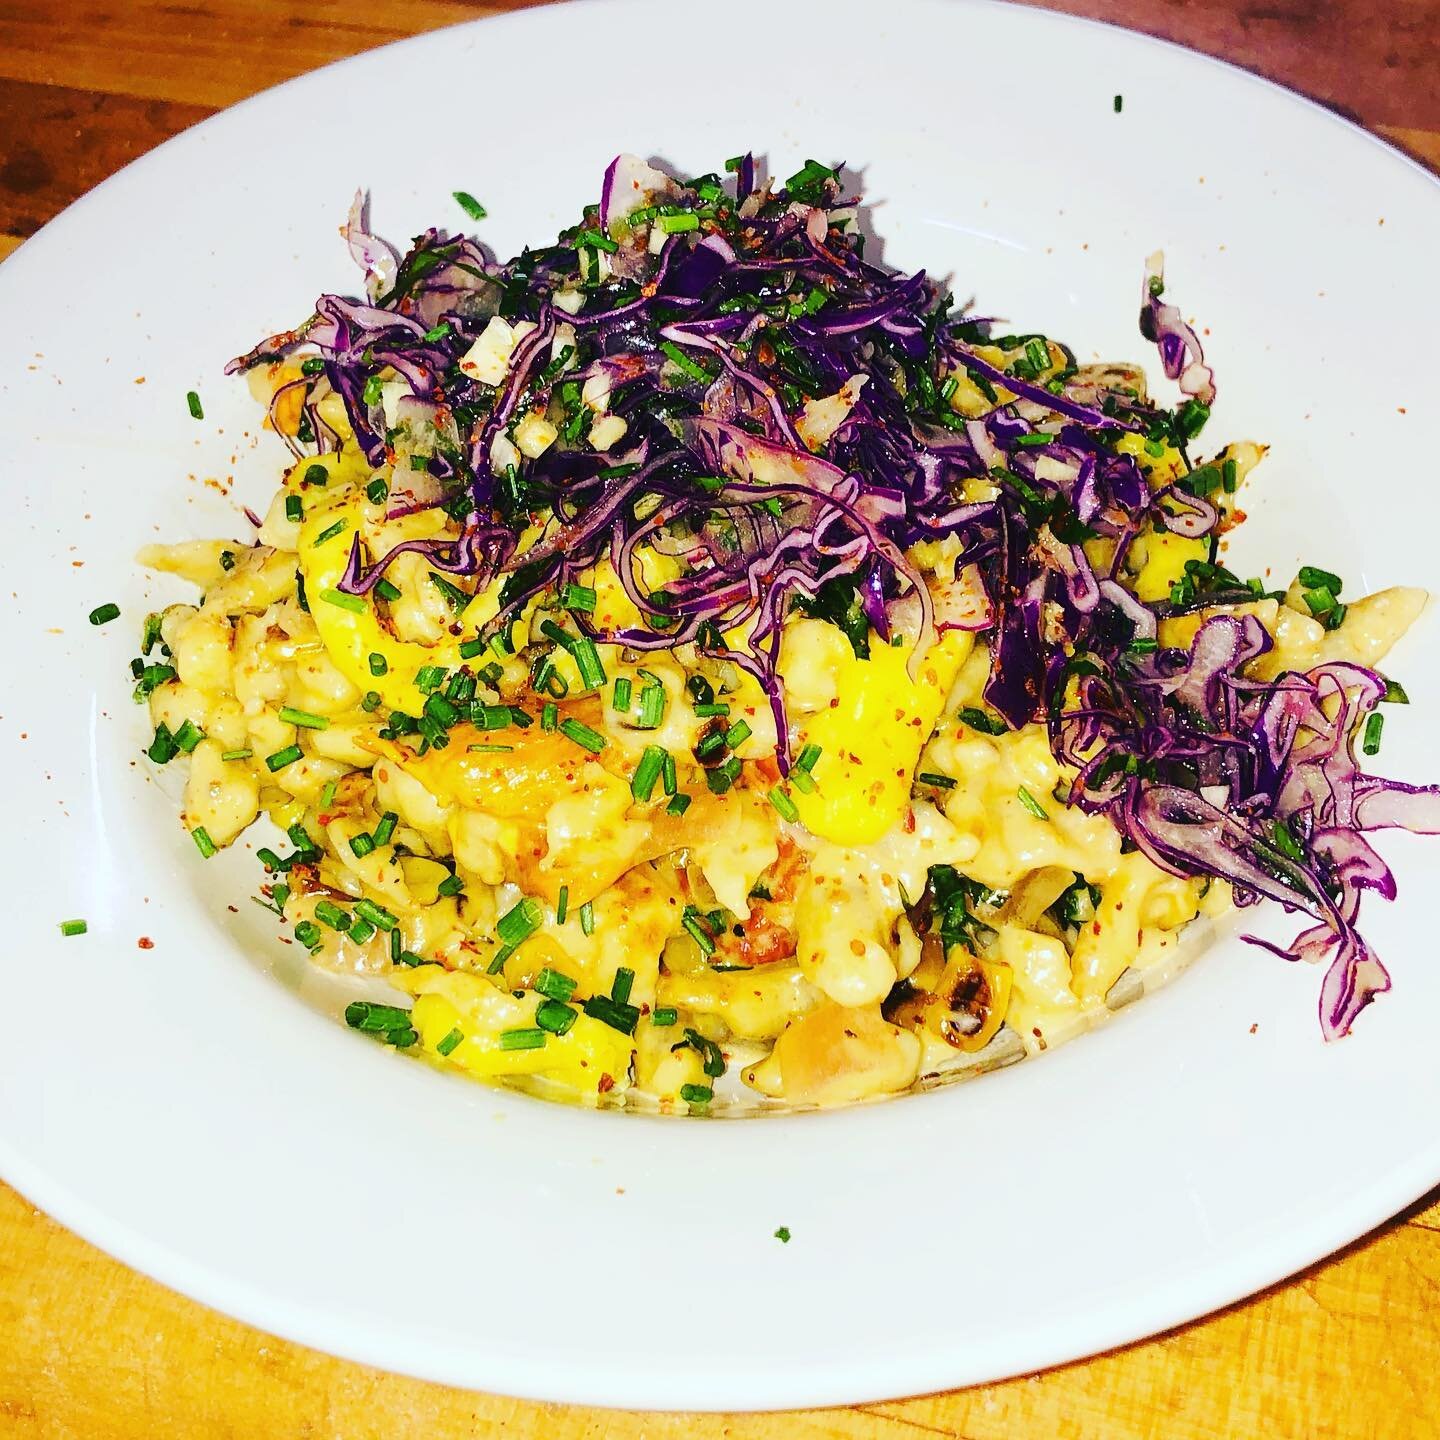 SUMMER SPAETZLE SPECIAL!! Sweet corn, cherry tomatoes, red cabbage gremolata all on top of our crazy delicious handmade noodles!! Come get some, we&rsquo;re open 8-1!!!
 #noodles#spaetzle#pdxnoodles#pdxfood#pdxfoodie#pdxeater#eaterpdx#montavilla#corn